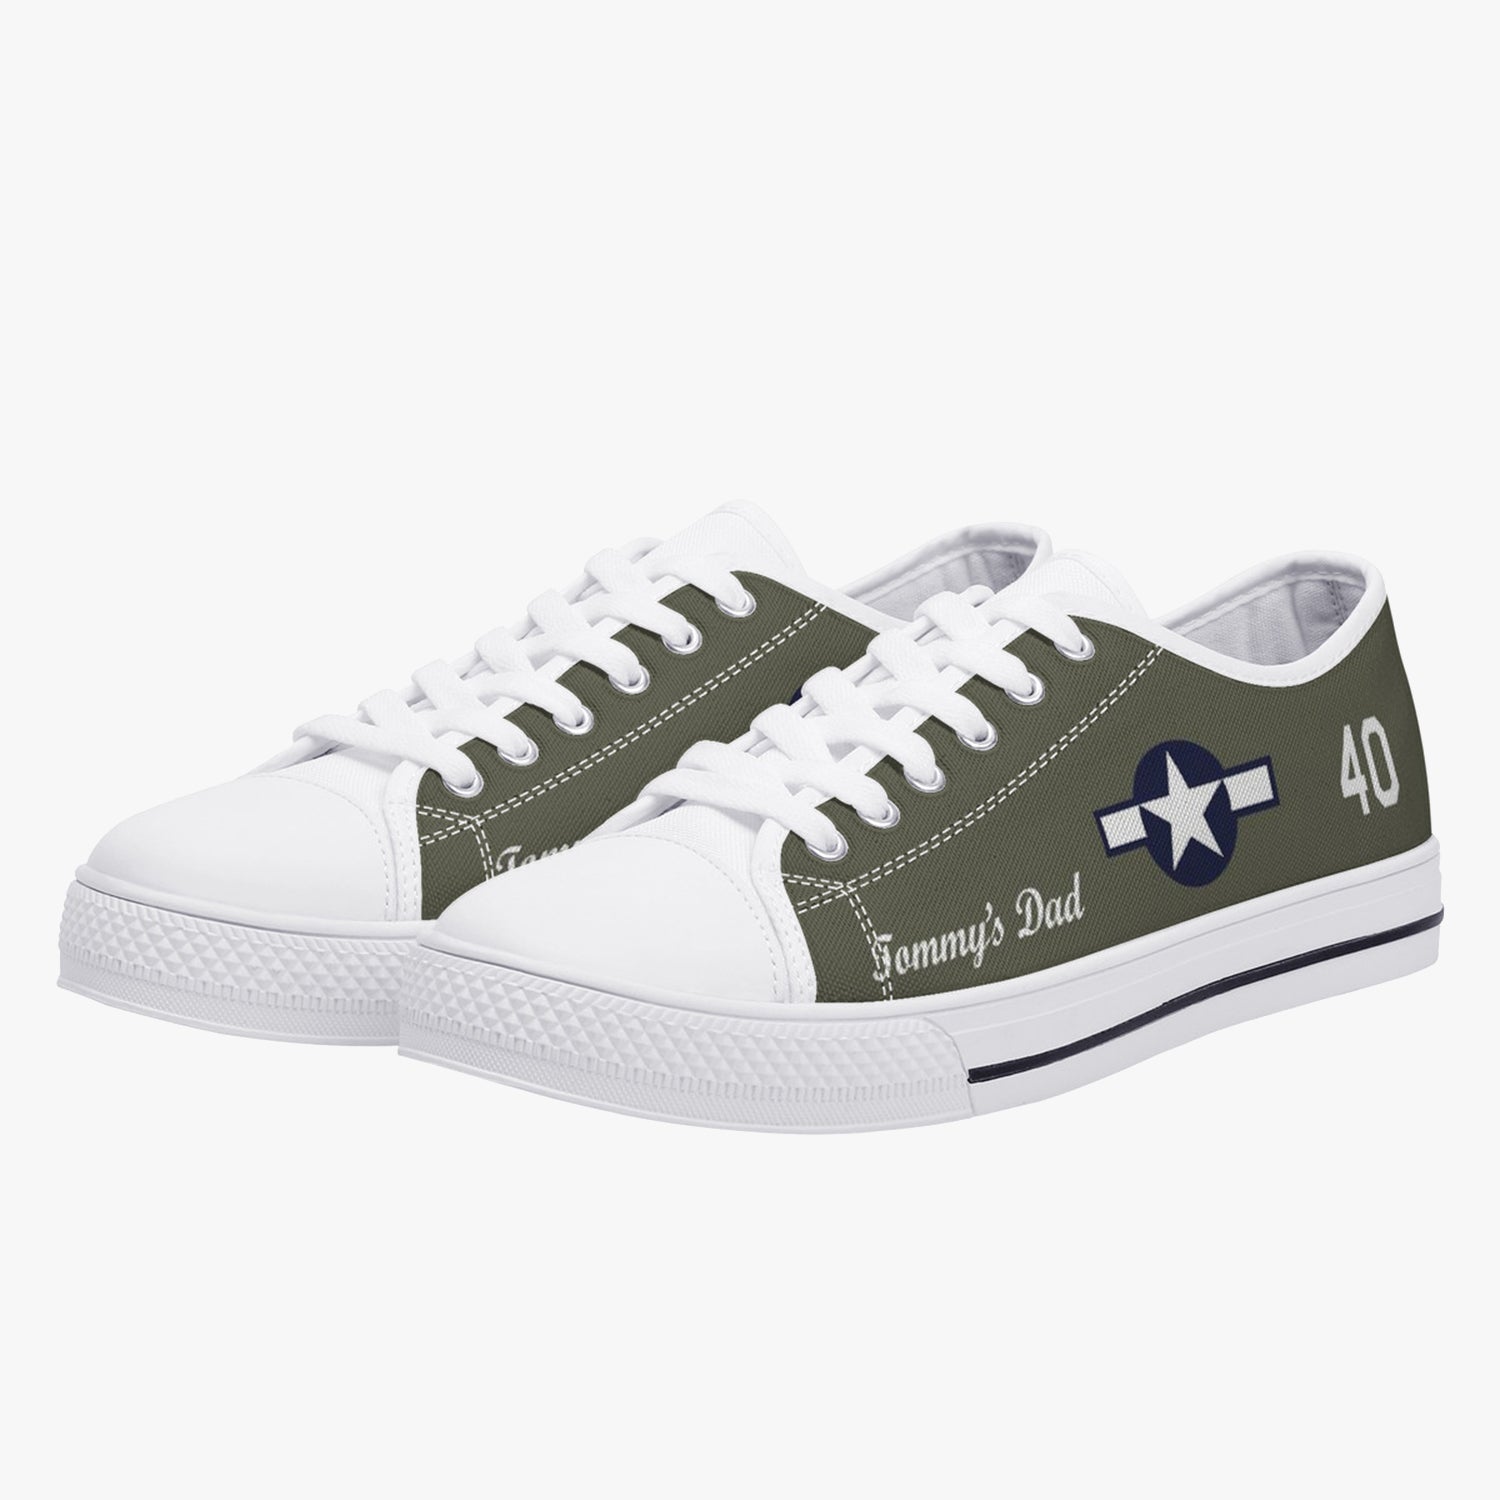 P-51 "Tommy's Dad" Low Top Canvas Shoes - I Love a Hangar